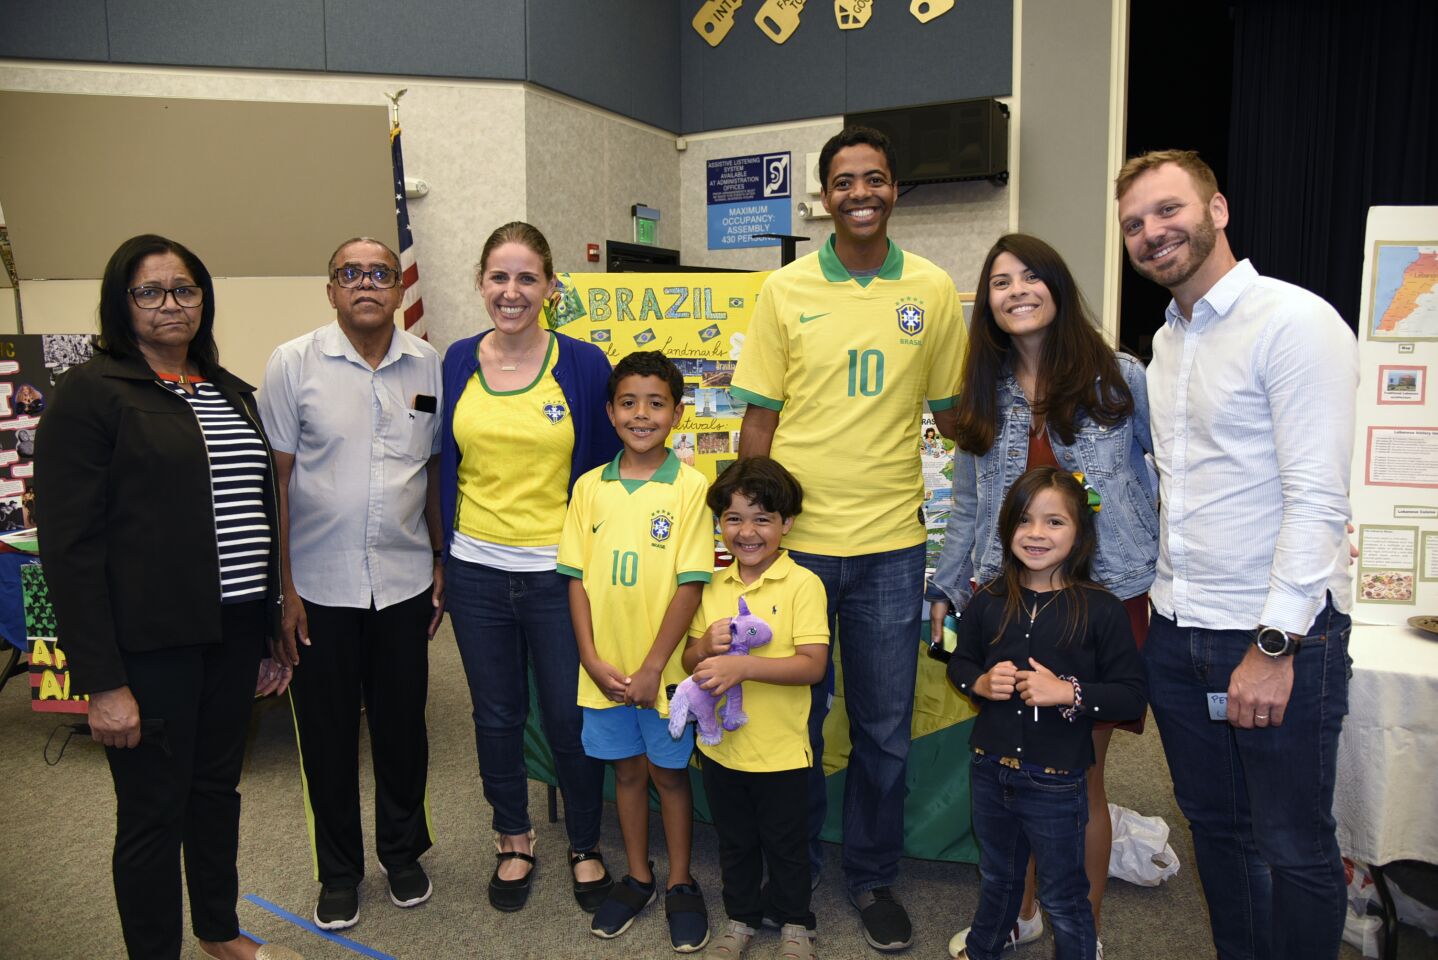 Brazil, with the Vitor and Landsberger families